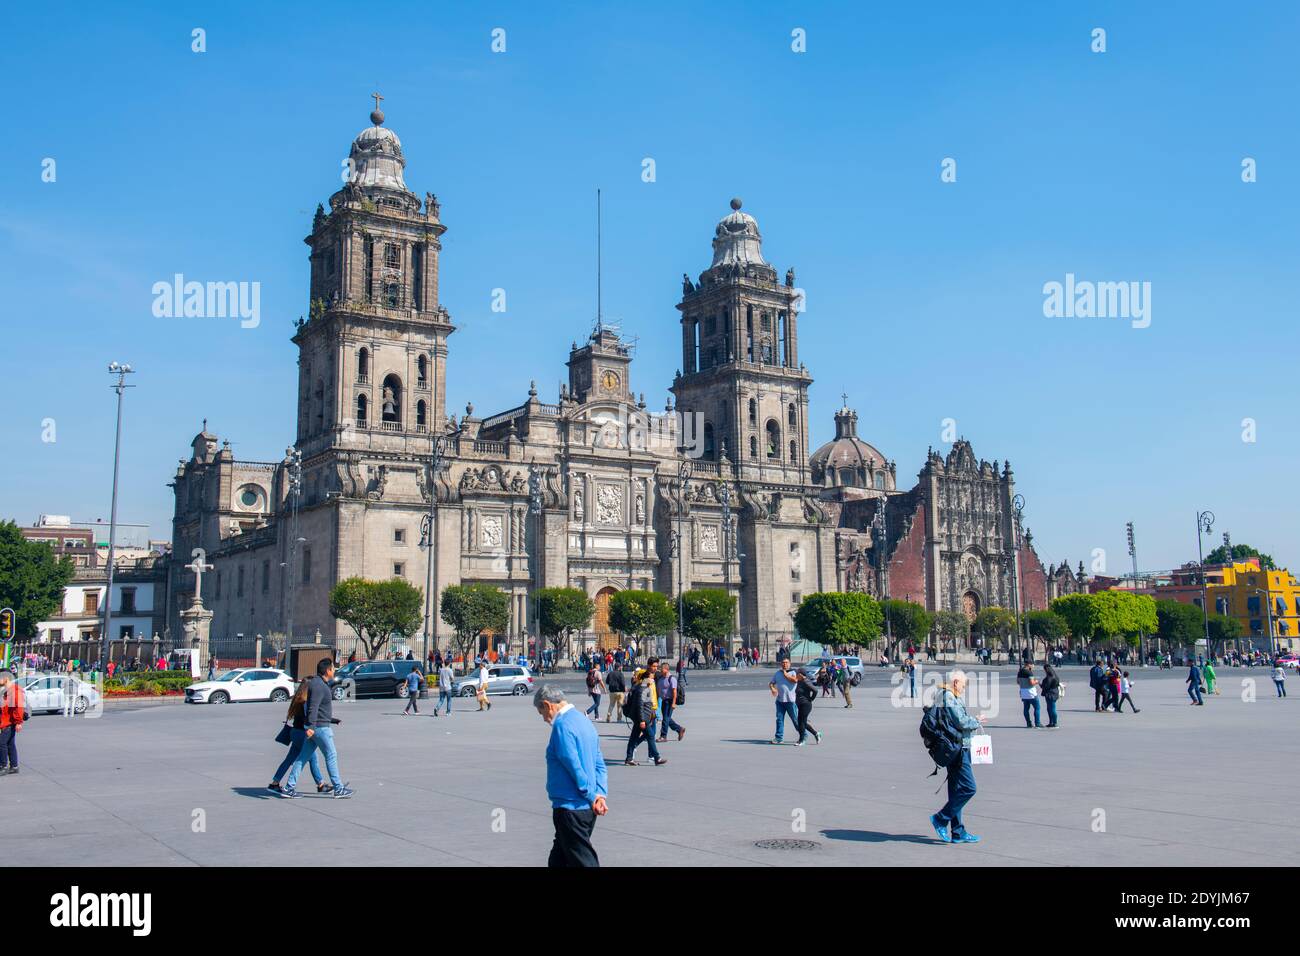 Metropolitan Cathedral at Historic center of Mexico City CDMX, Mexico. Historic center of Mexico City is a UNESCO World Heritage Site. Stock Photo